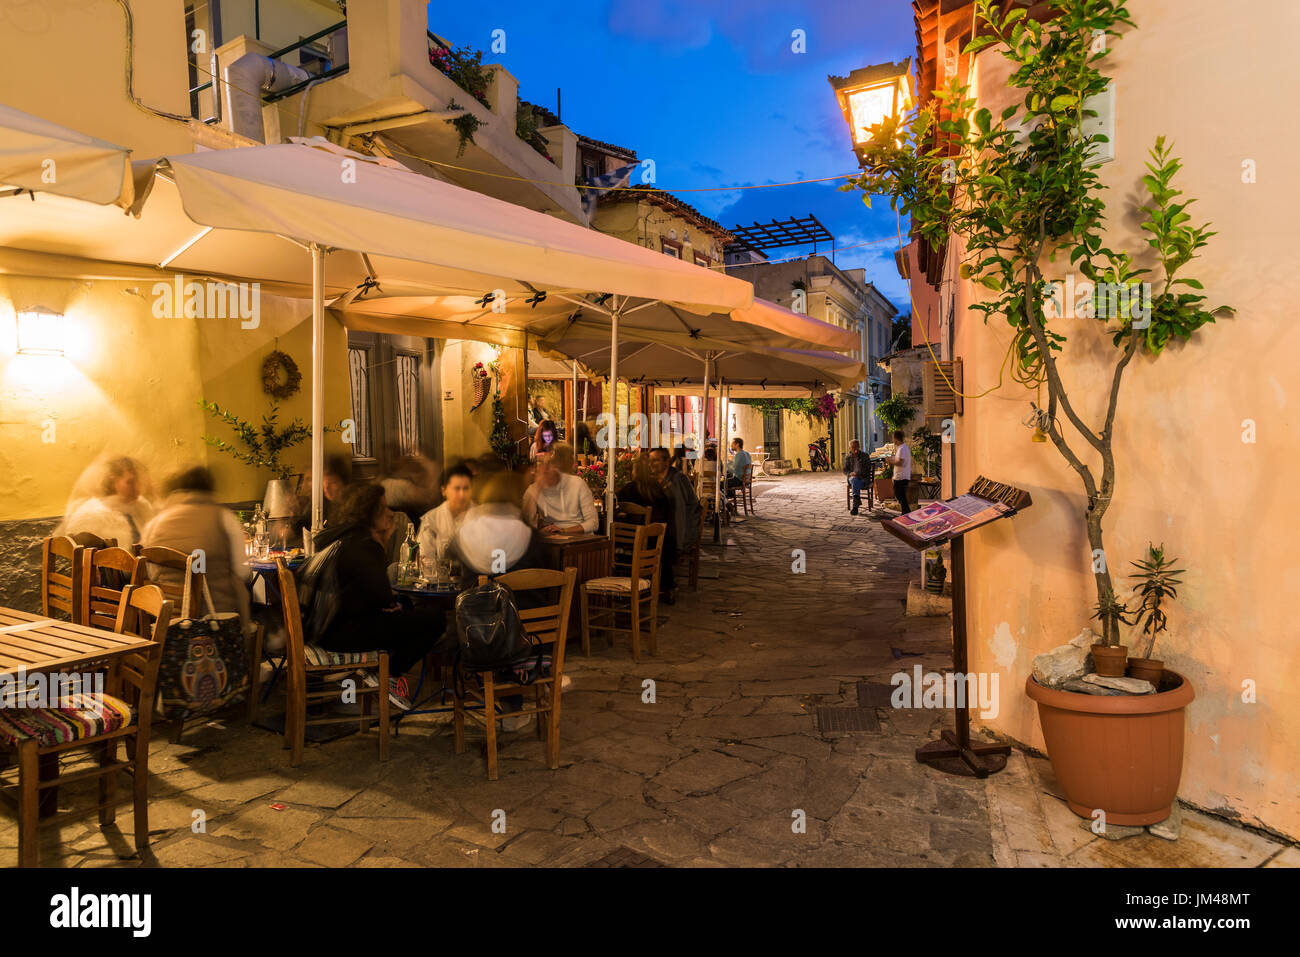 Night view of an outdoor cafe in the picturesque neighborhood of Anafiotika, Athens, Attica, Greece Stock Photo